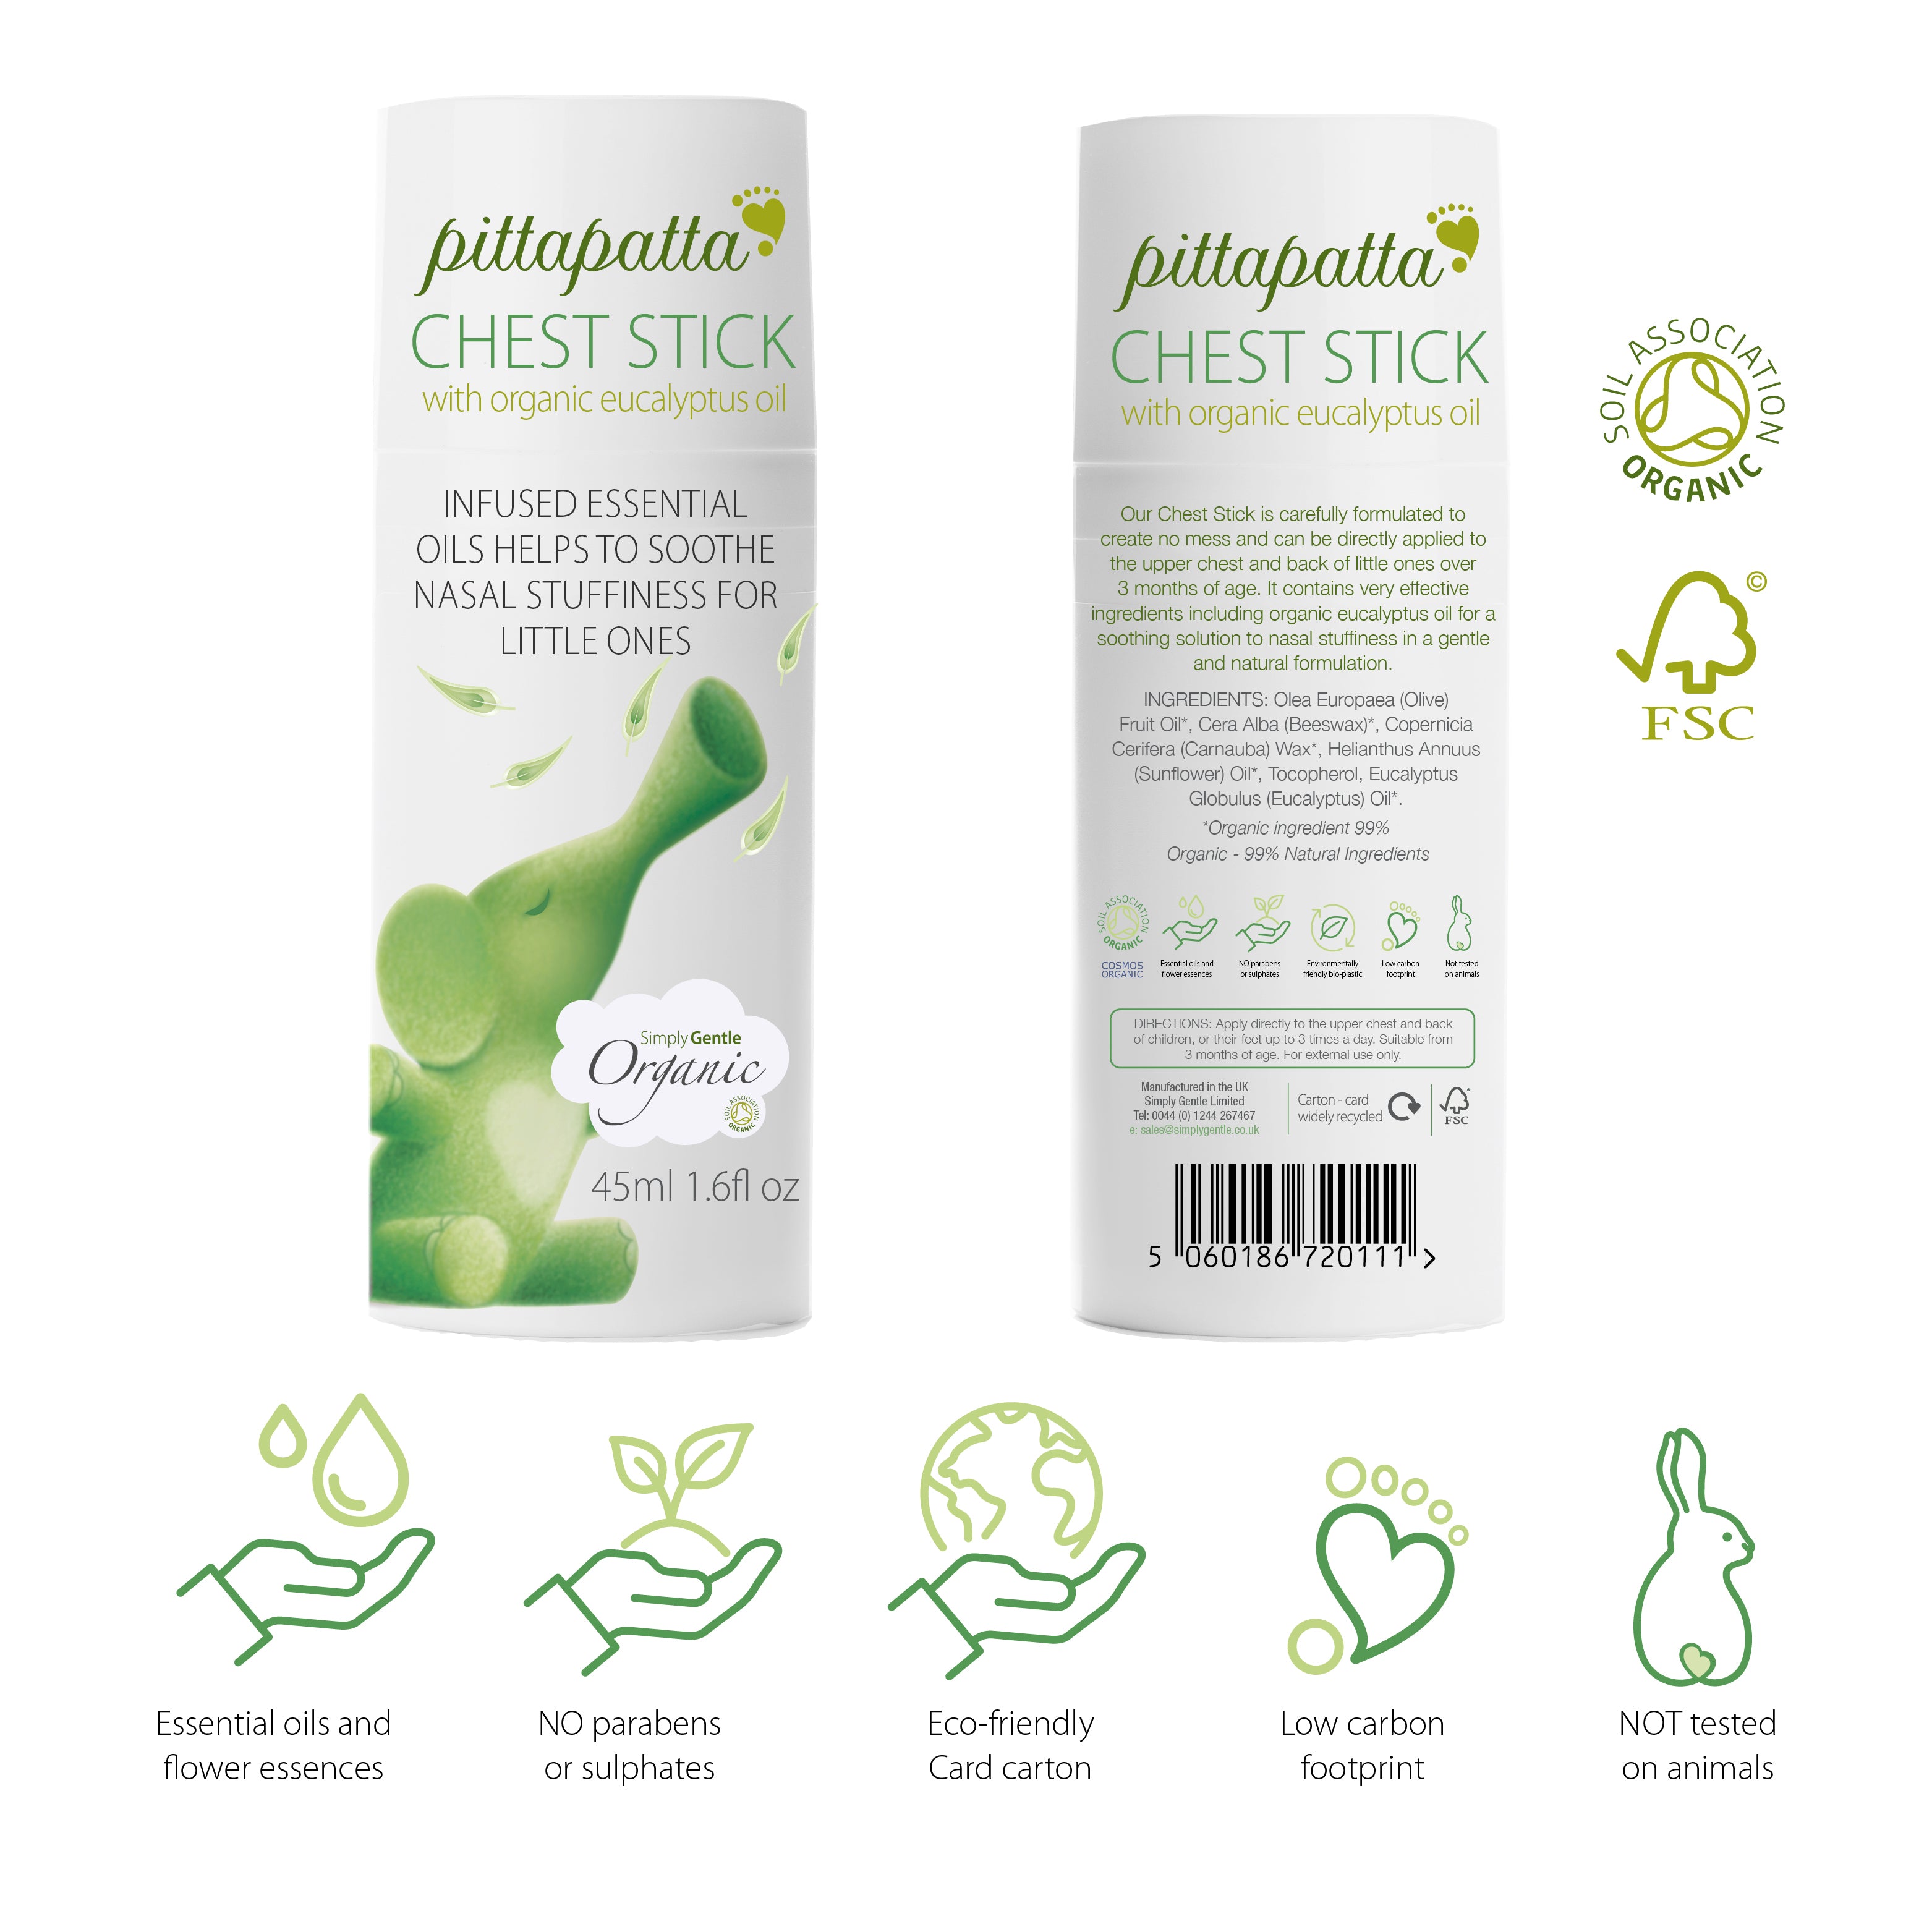 Pittapatta Chest Stick infused essential oils, helps to soothe nasal stuffiness for little ones